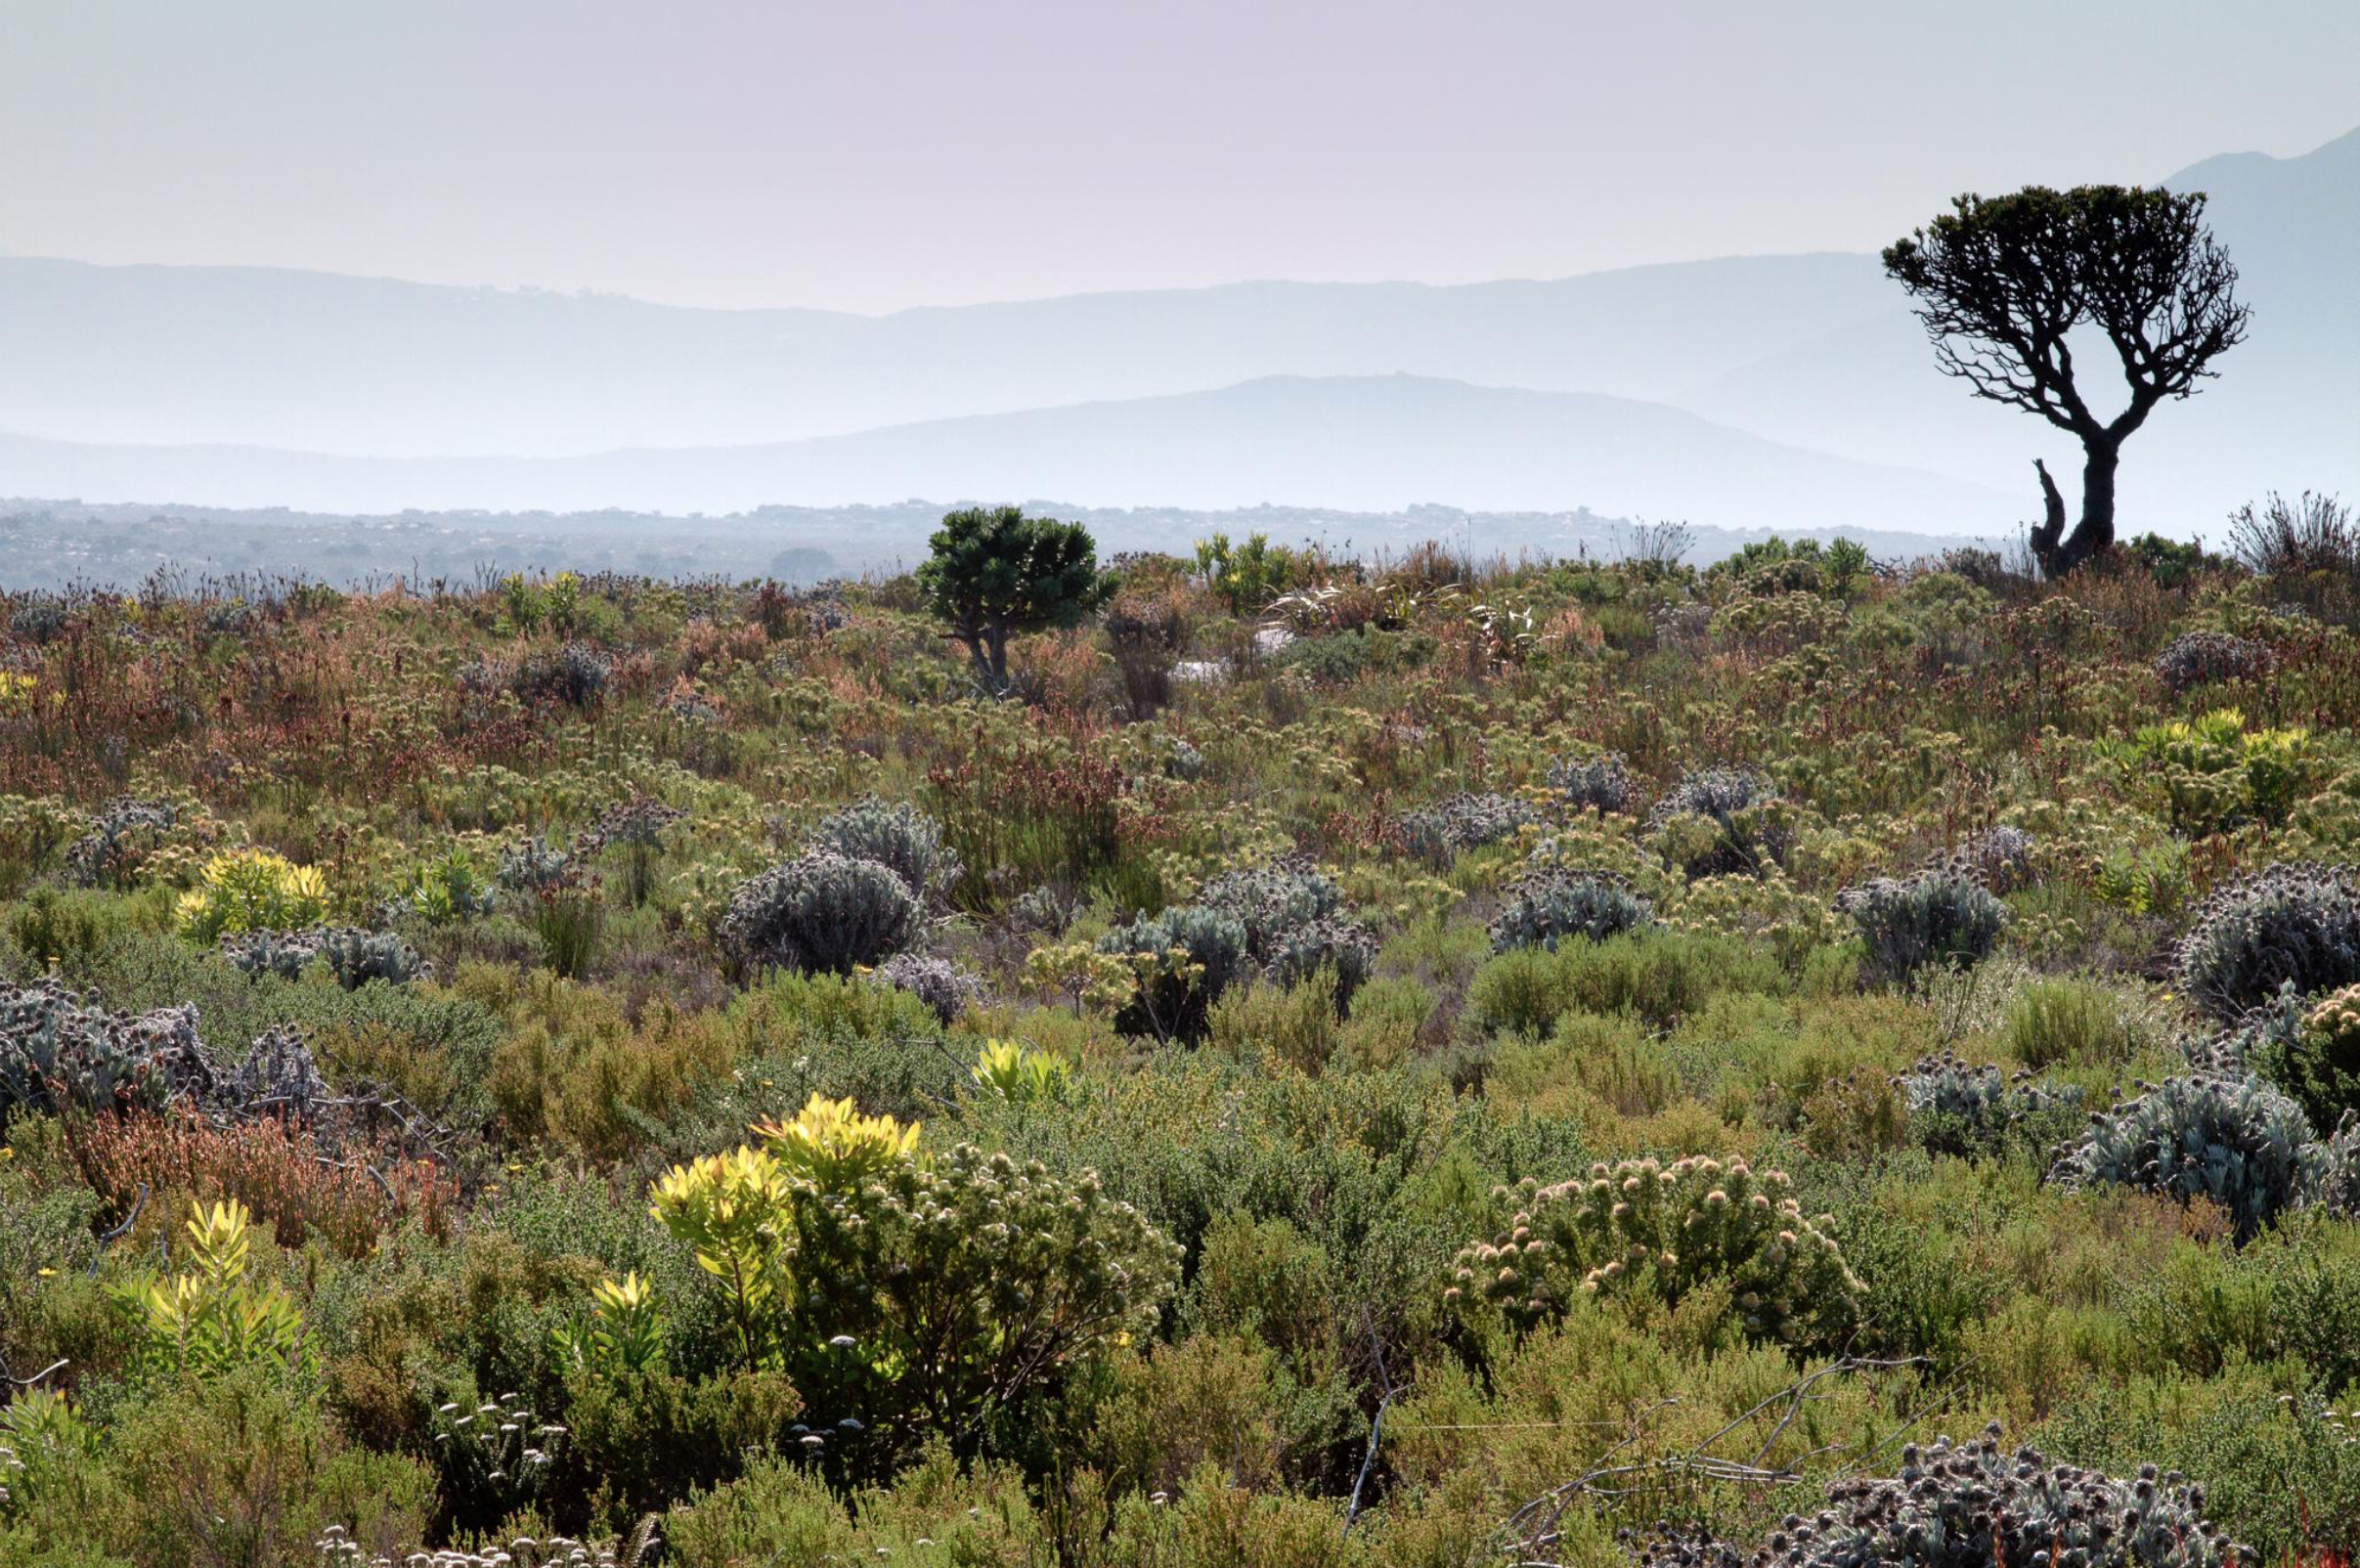 Fynbos is home to an incredible diversity of plants. Almost 9000 species occur in the region, with 6000 found nowhere else on earth. At present, nearly 2000 of these species are threatened with extinction. Photo: Adam Wilson